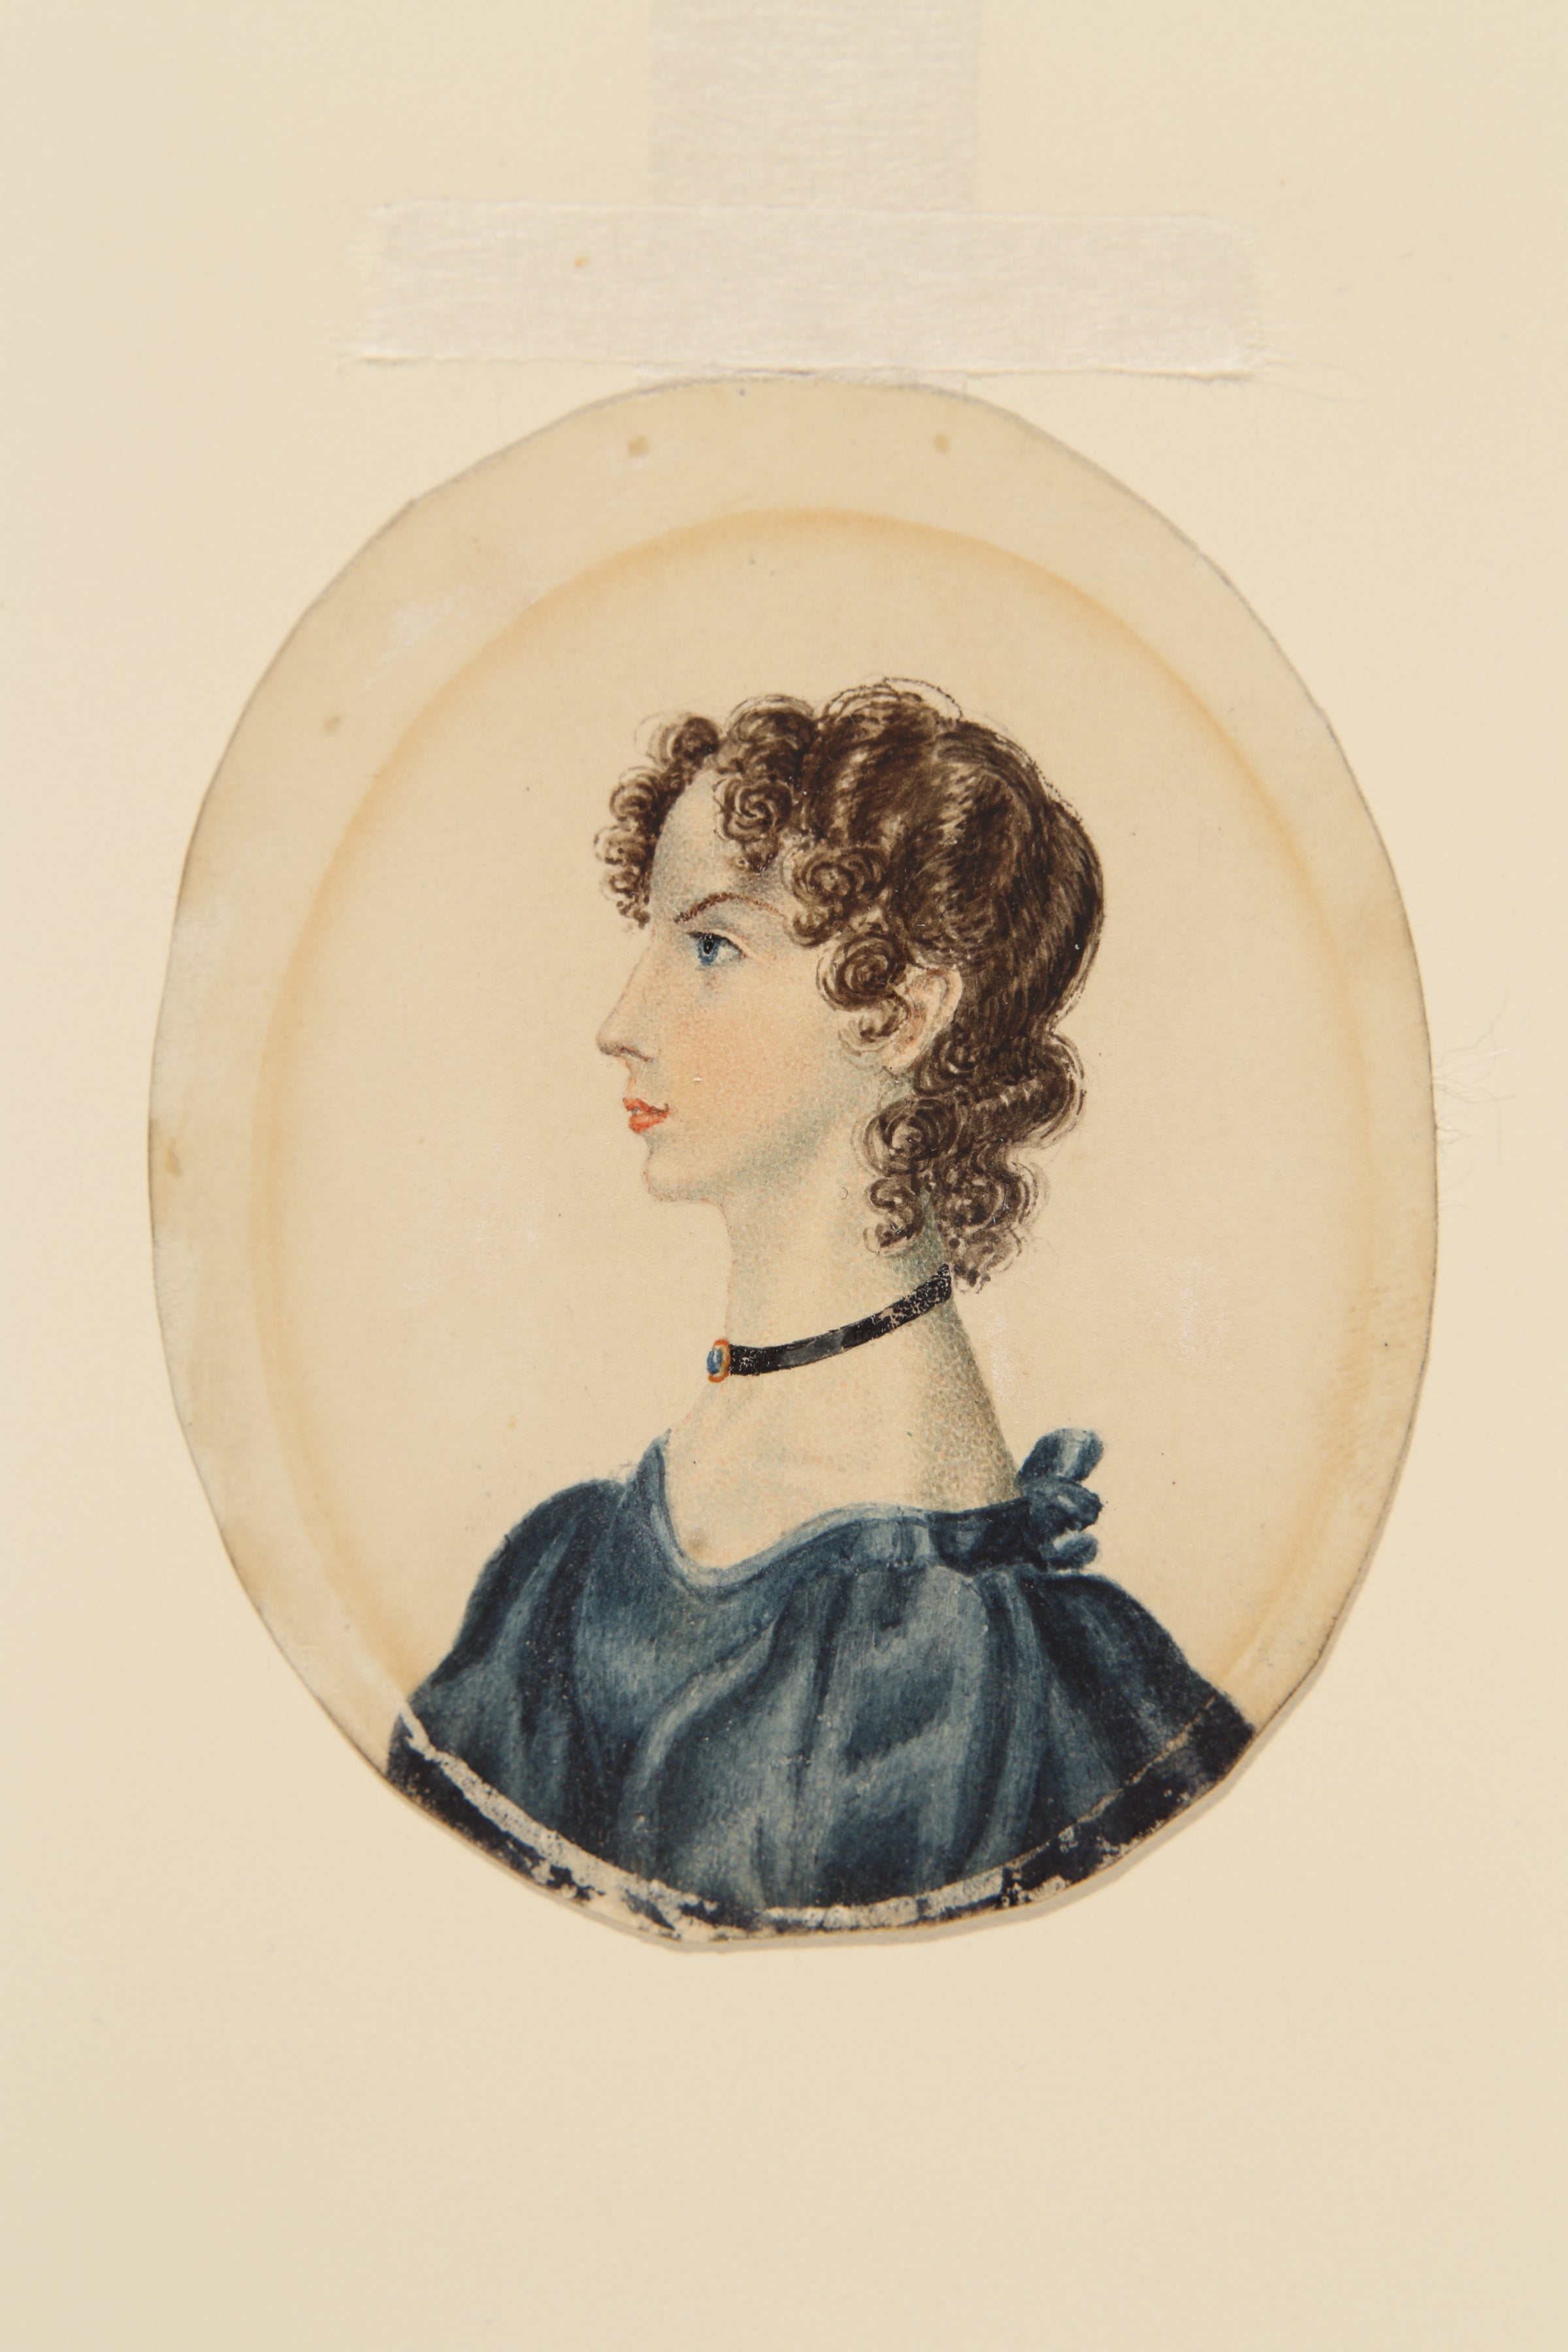 Anne Bronte was a skilled rock collector with an interest in geology, research has found (University of Aberdeen)